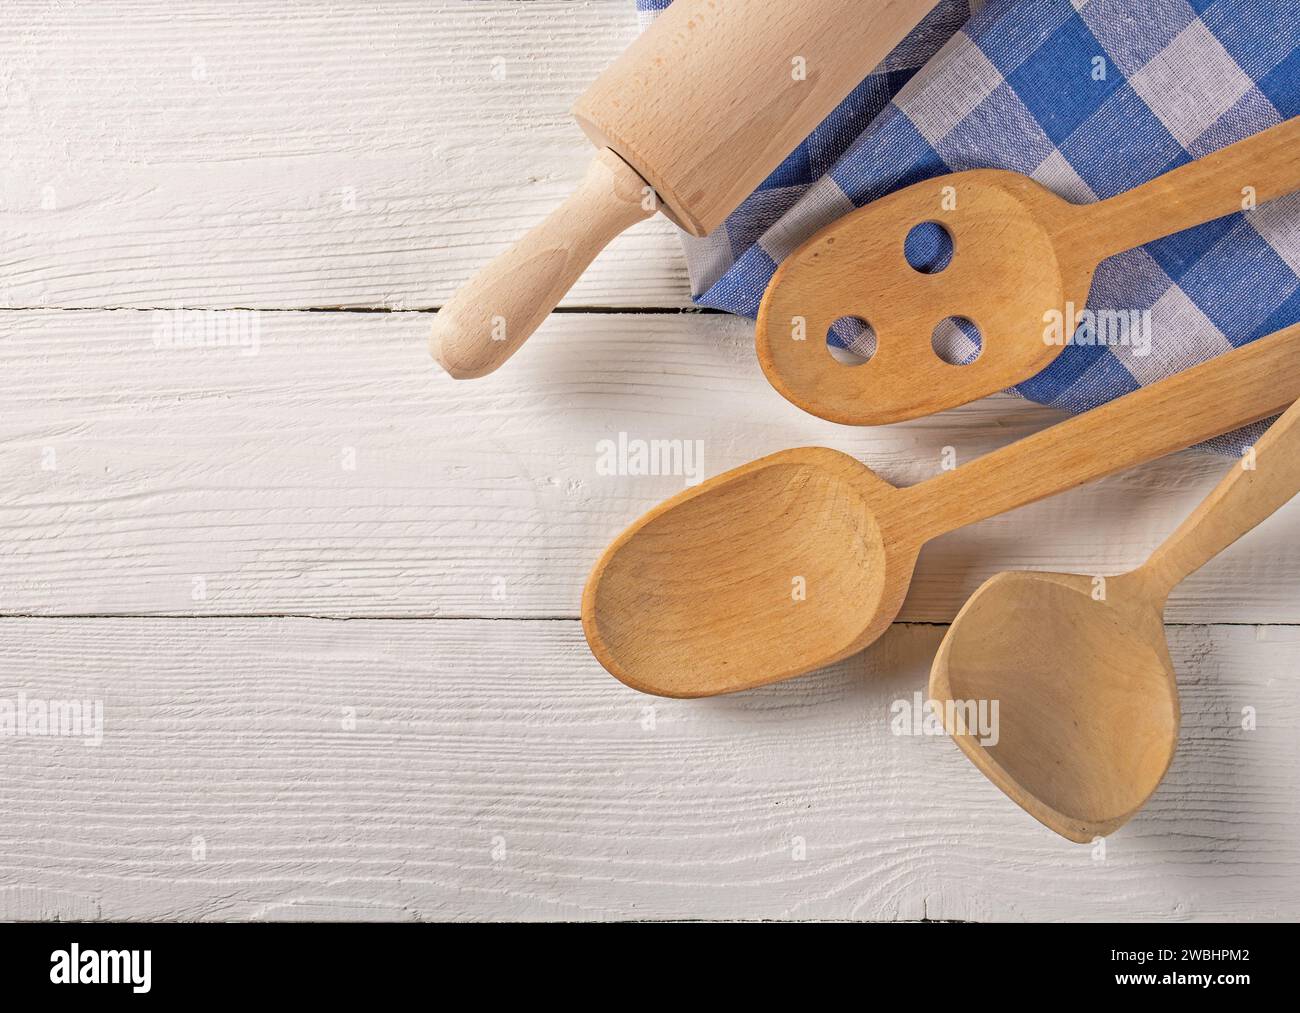 Top View of Wooden Kitchen Accessories and Towel on Natural Board Background Stock Photo